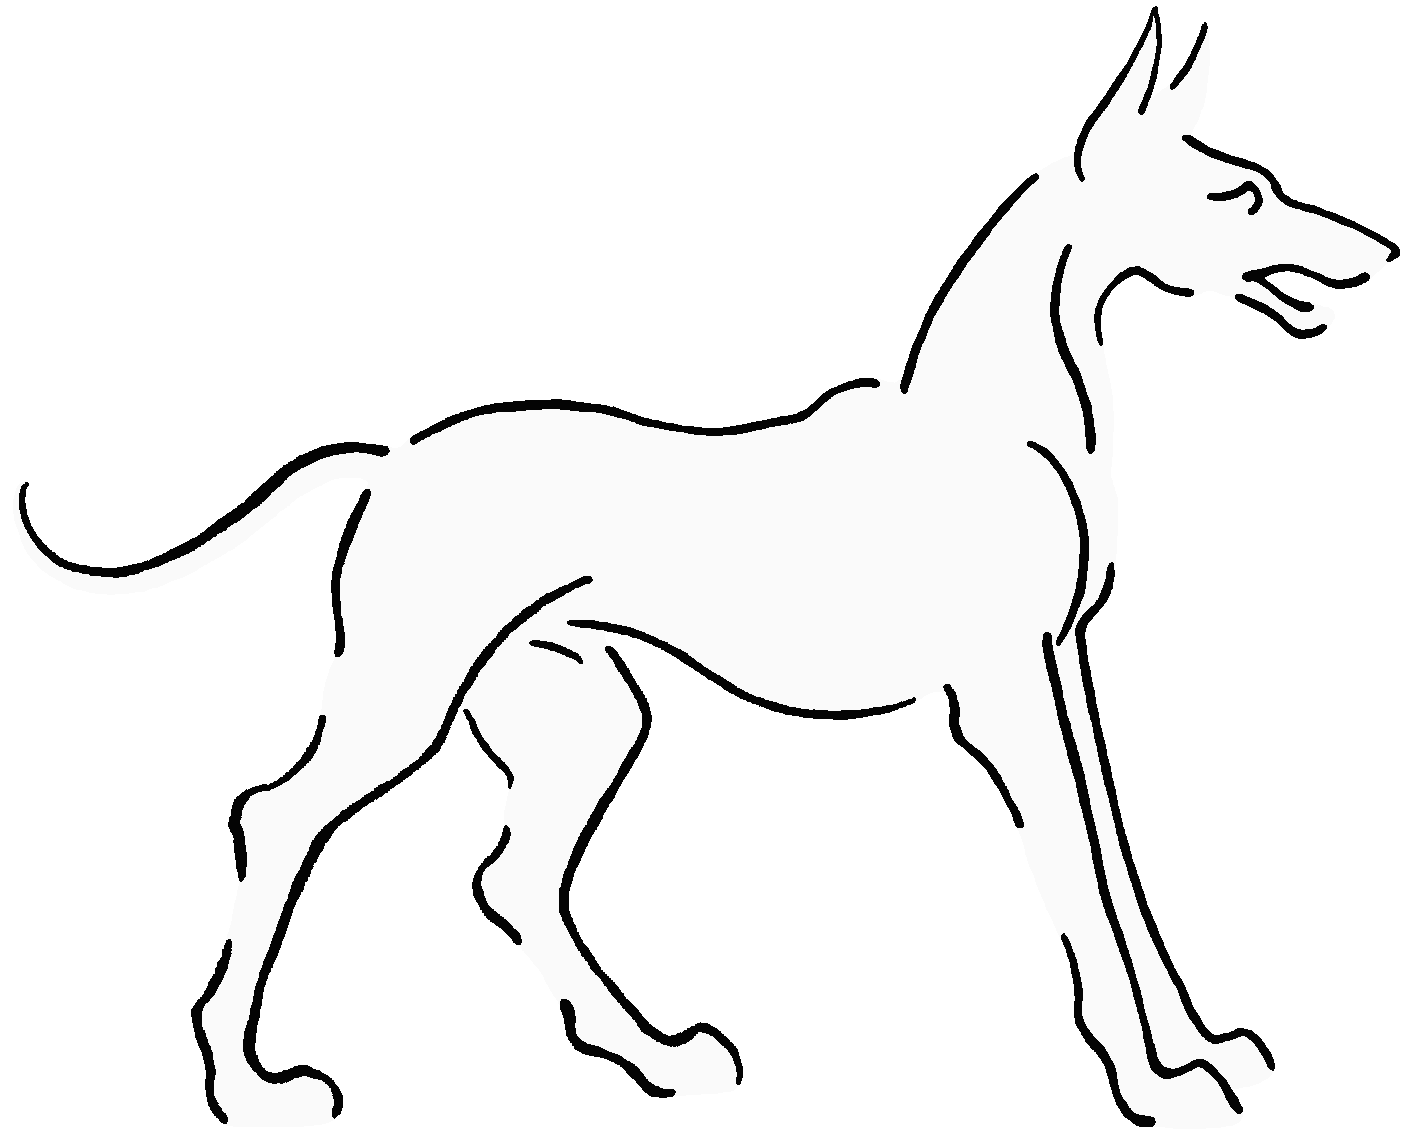 Outline drawing of white lurcher